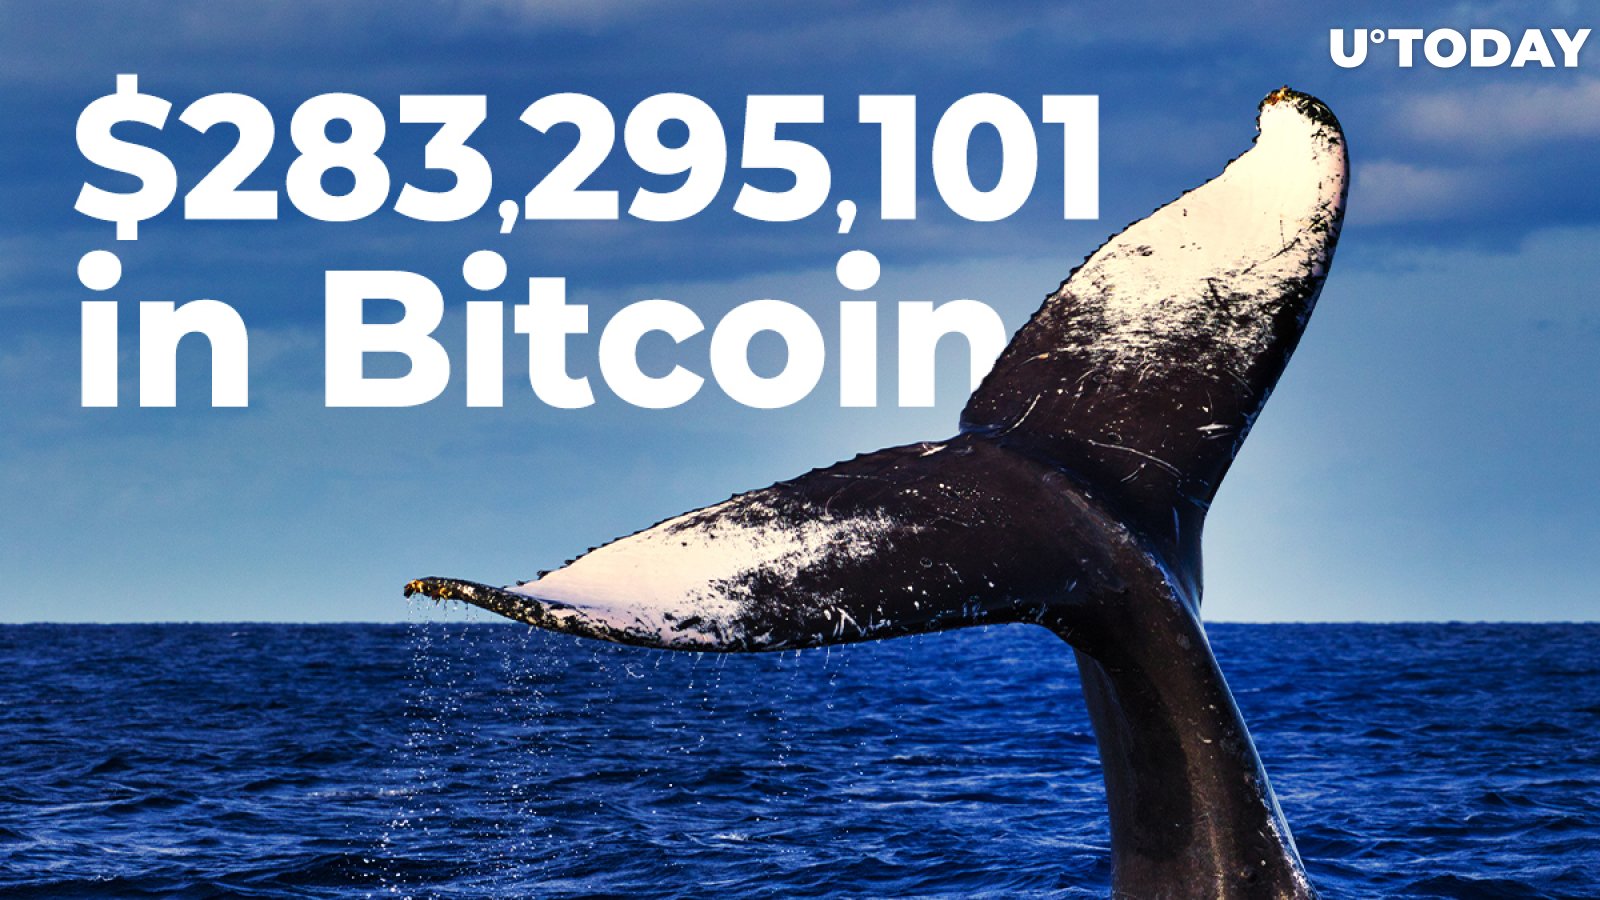 $283,295,101 in Bitcoin Shifted by Whales for Just $22 Fee As BTC holds at $13,000